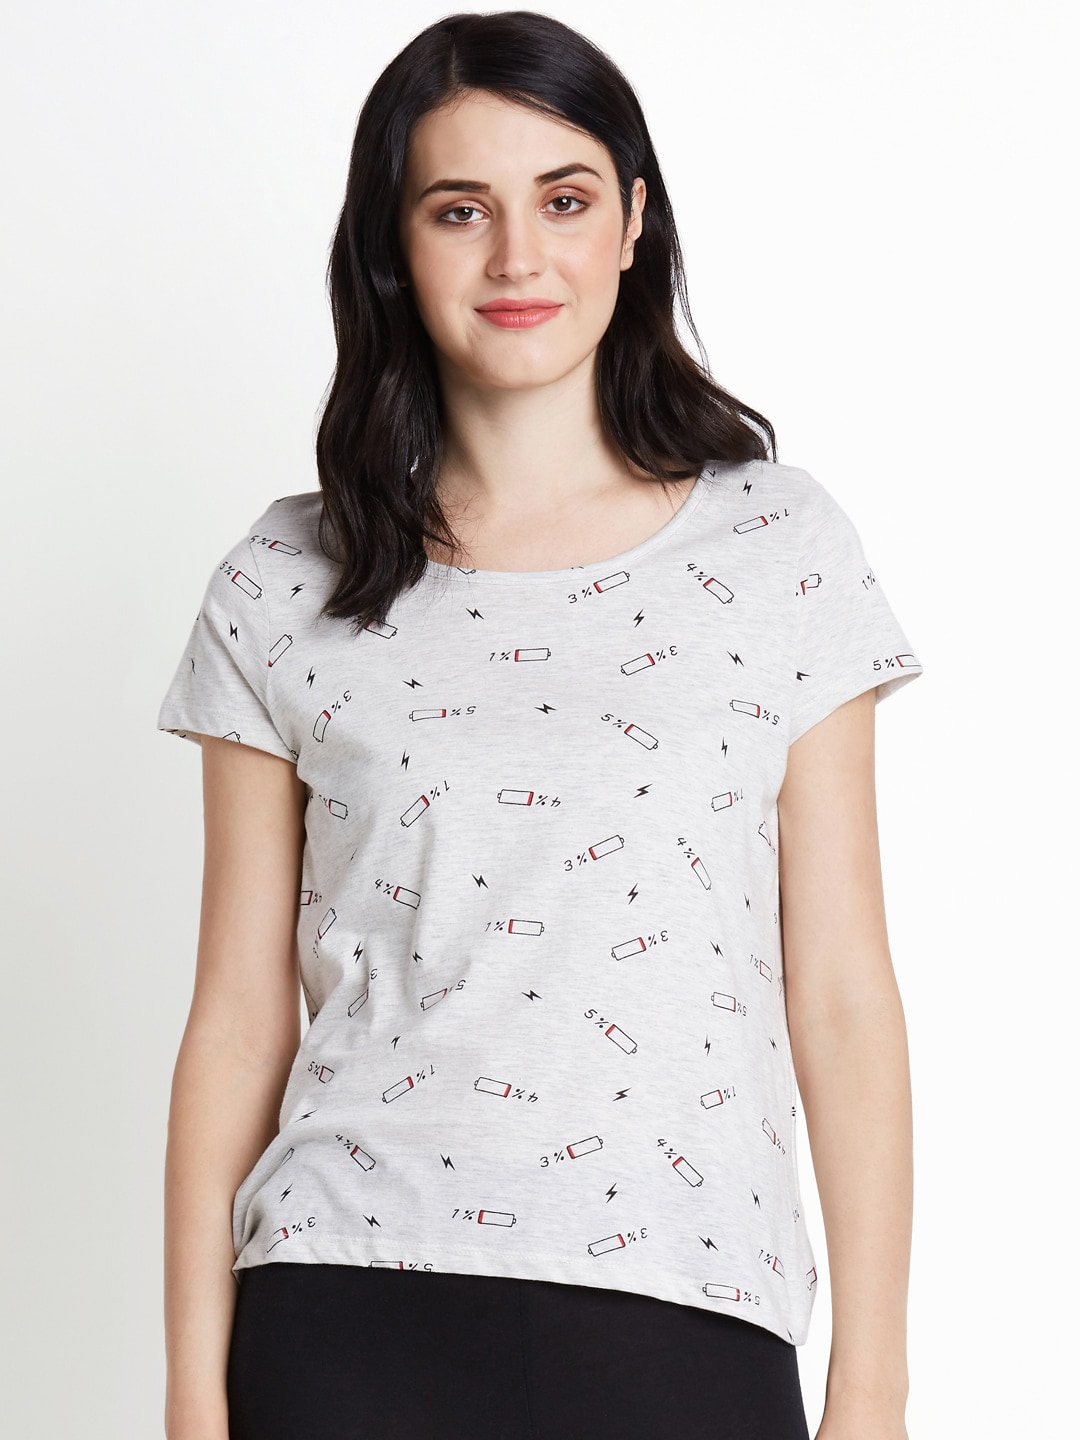 Dreamz by Pantaloons Women Grey Printed Round Neck Lounge T-shirt Price in India